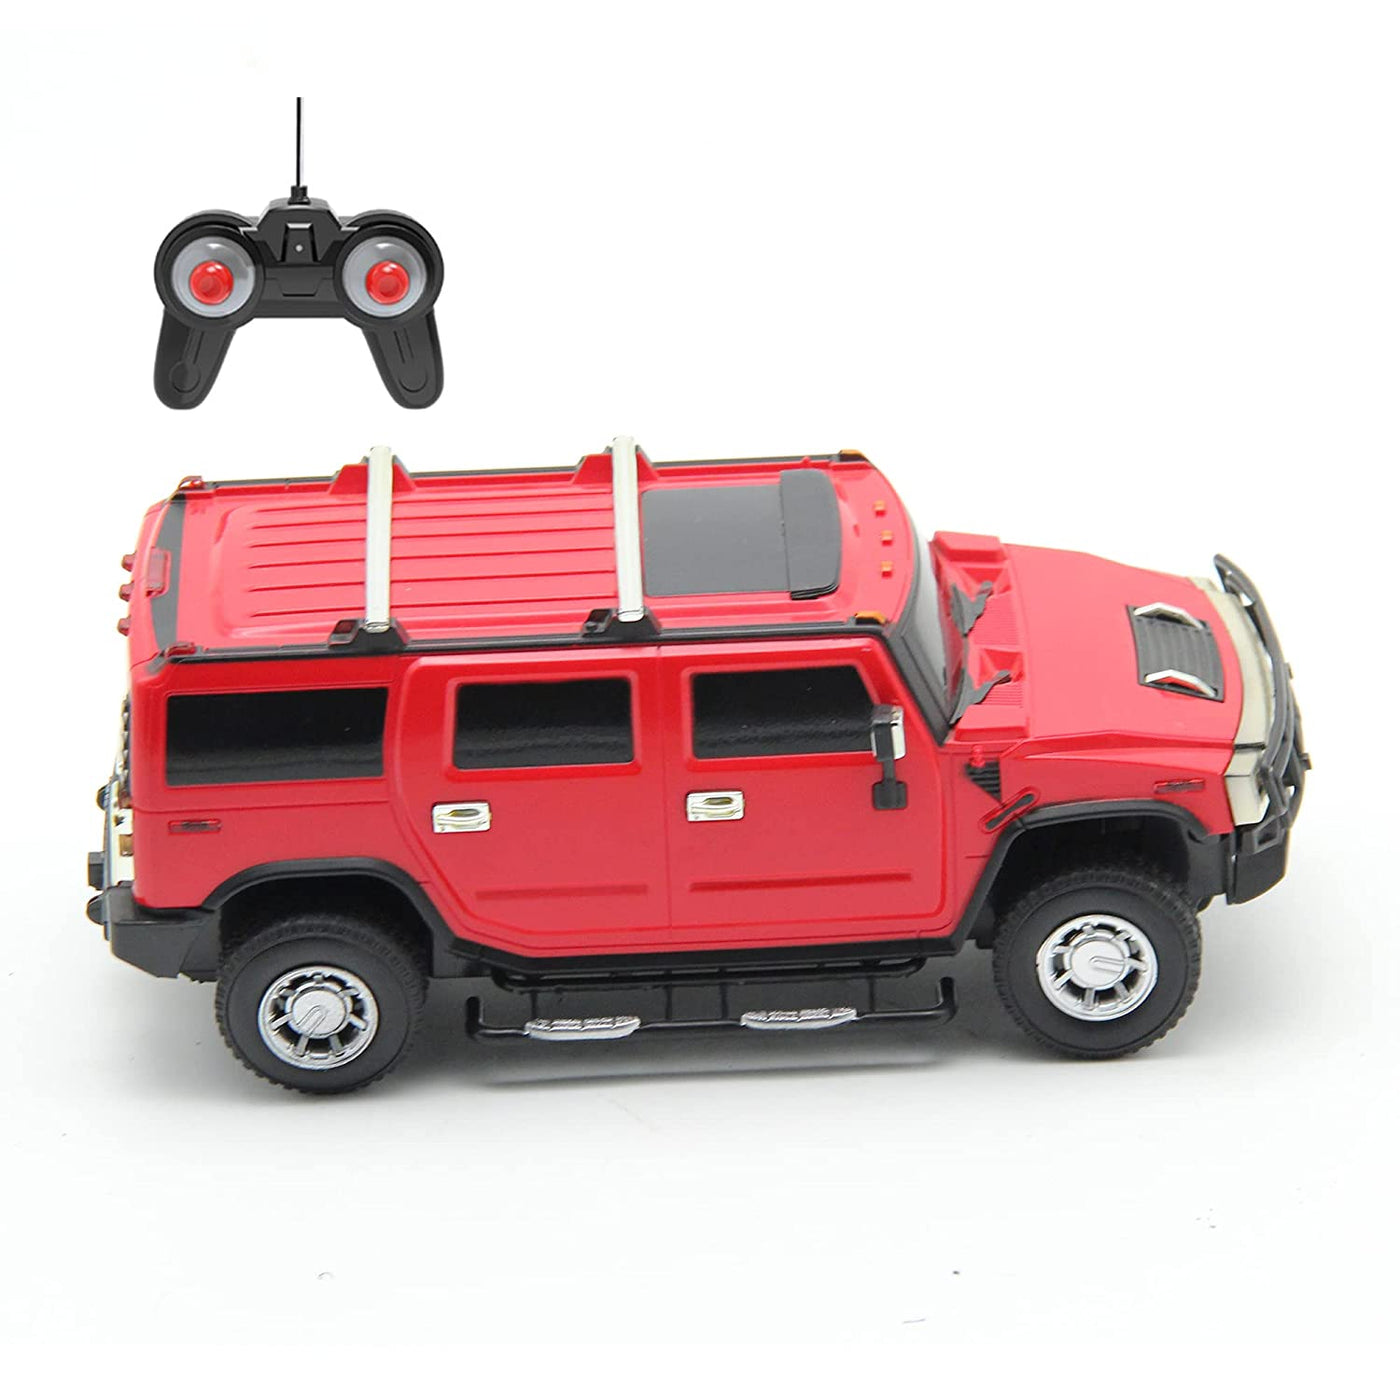 Army Vehicle RC Scale 1:24 - Red | Playzu